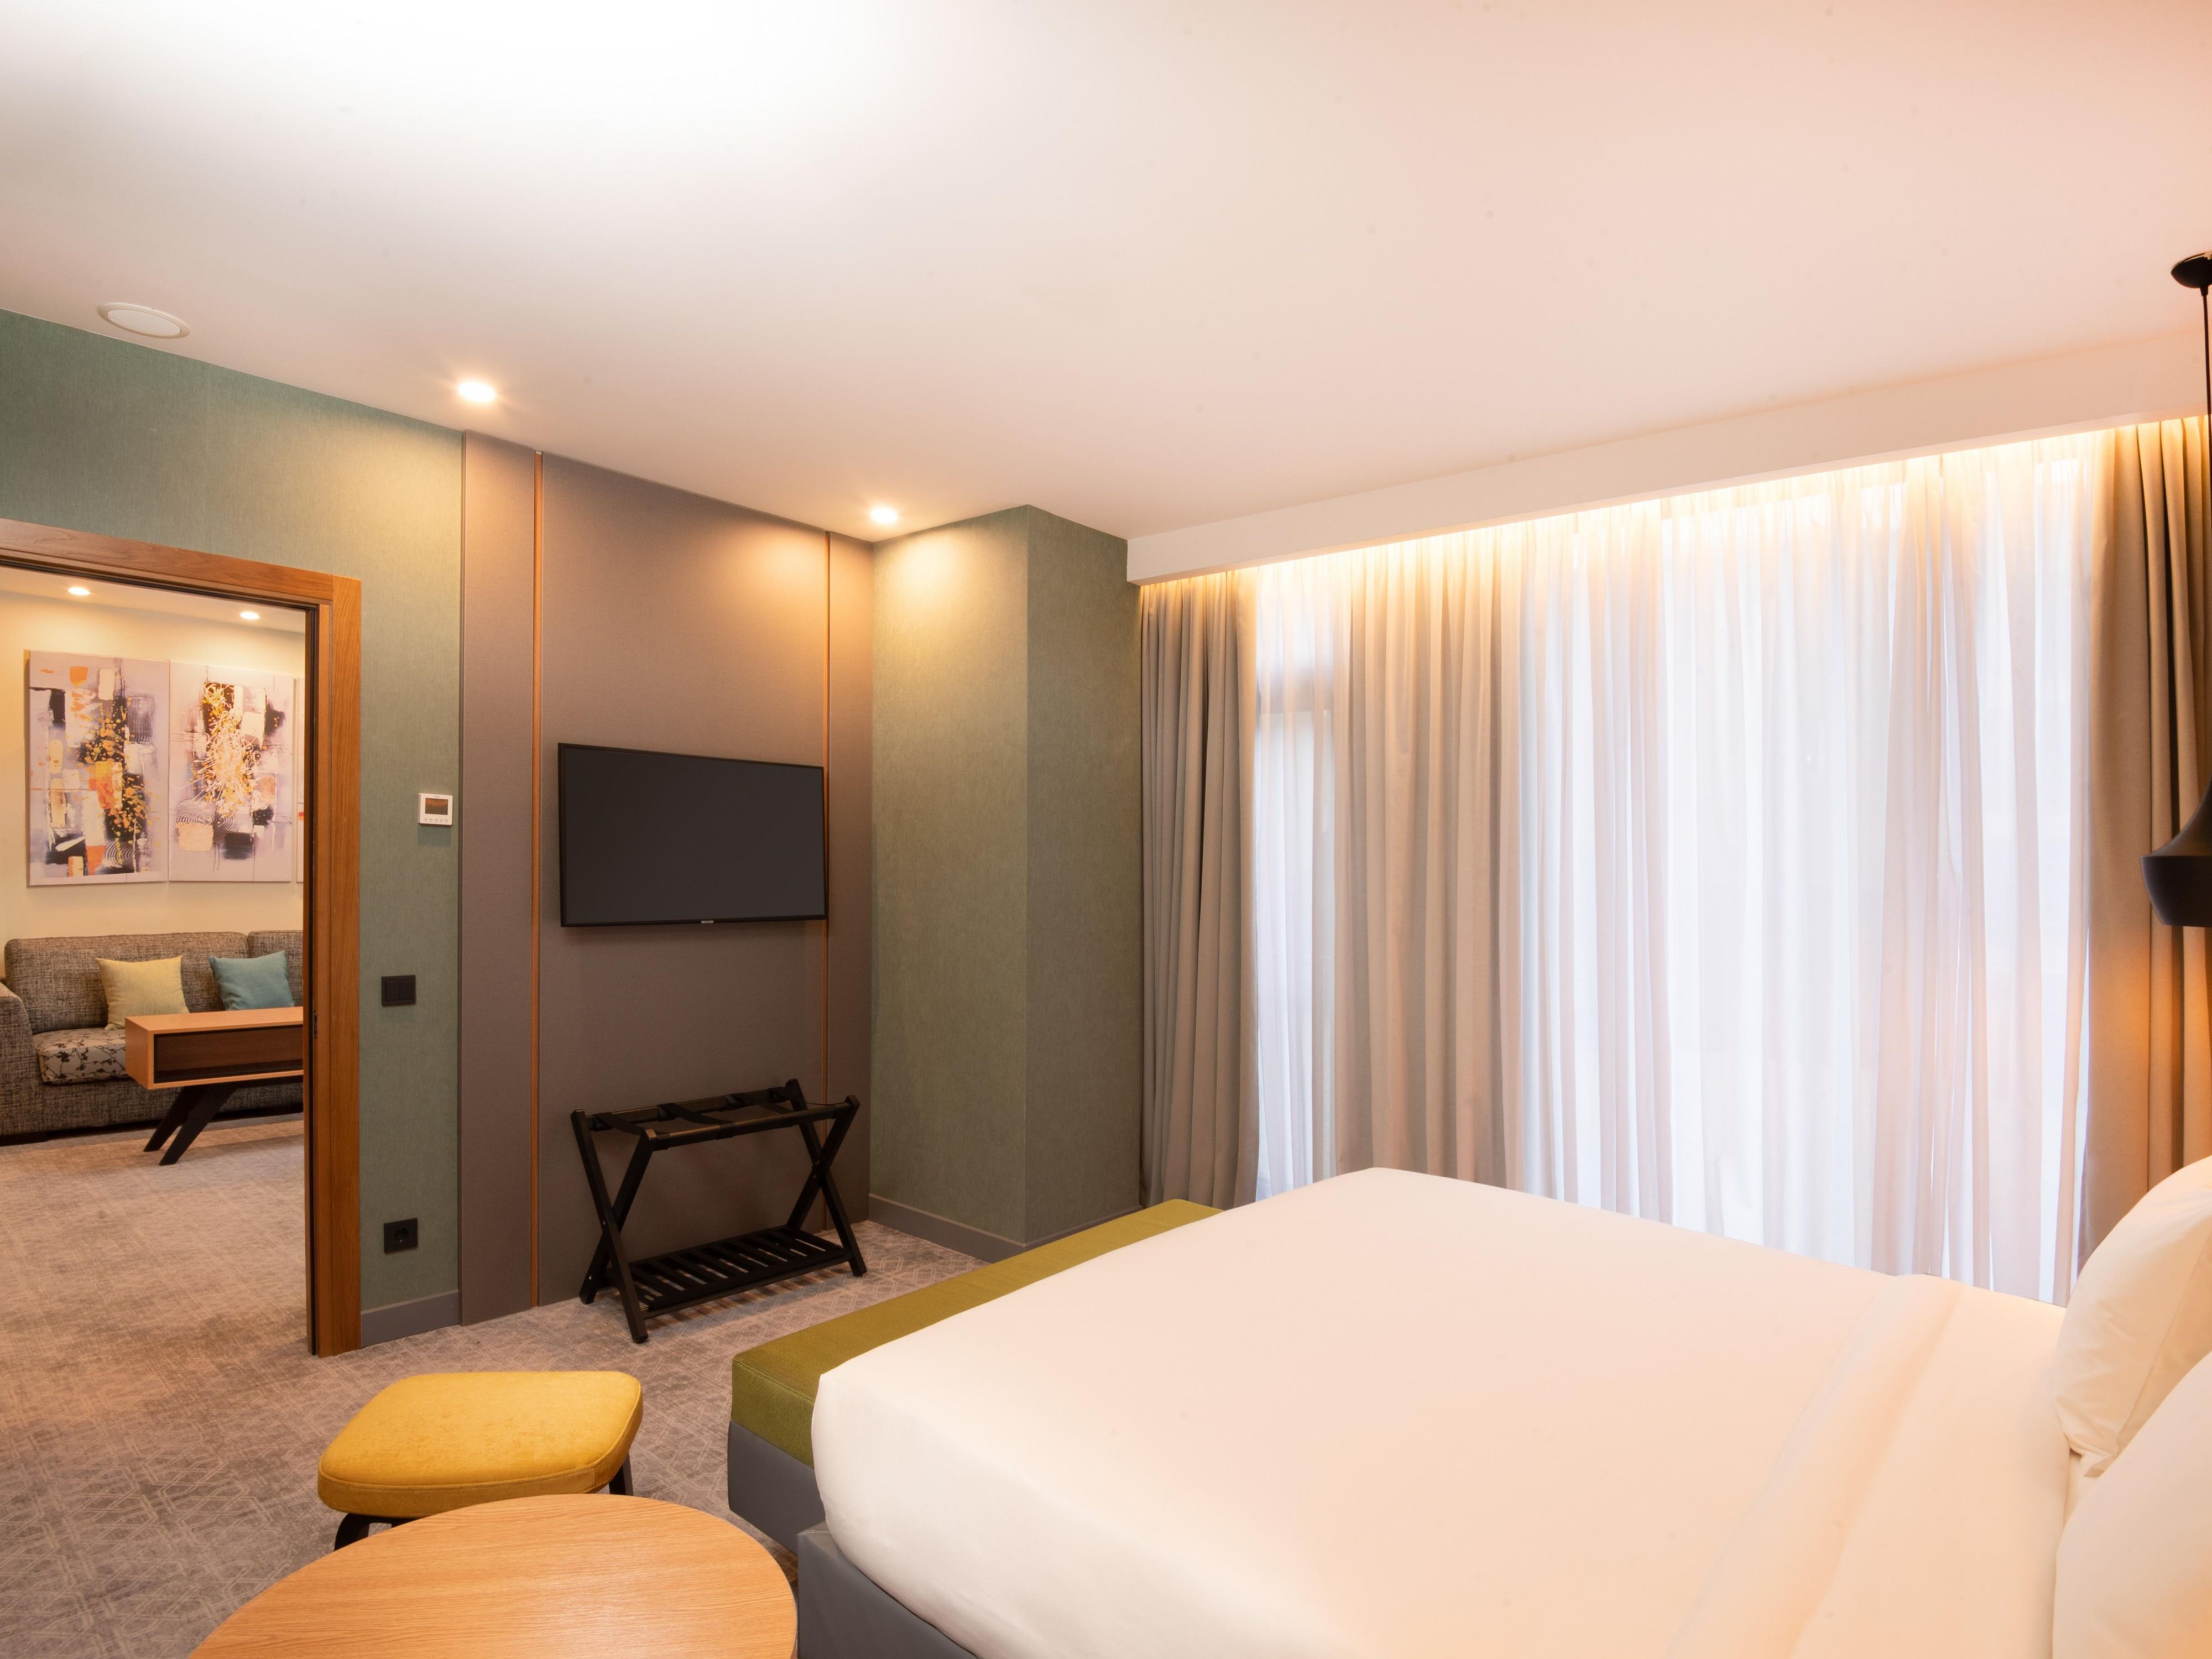 Enjoy our 55 square metre bedroom suite with a living and working area, as well as a large terrace overlooking the cosy courtyard. Please contact the hotel directly to make a reservation.